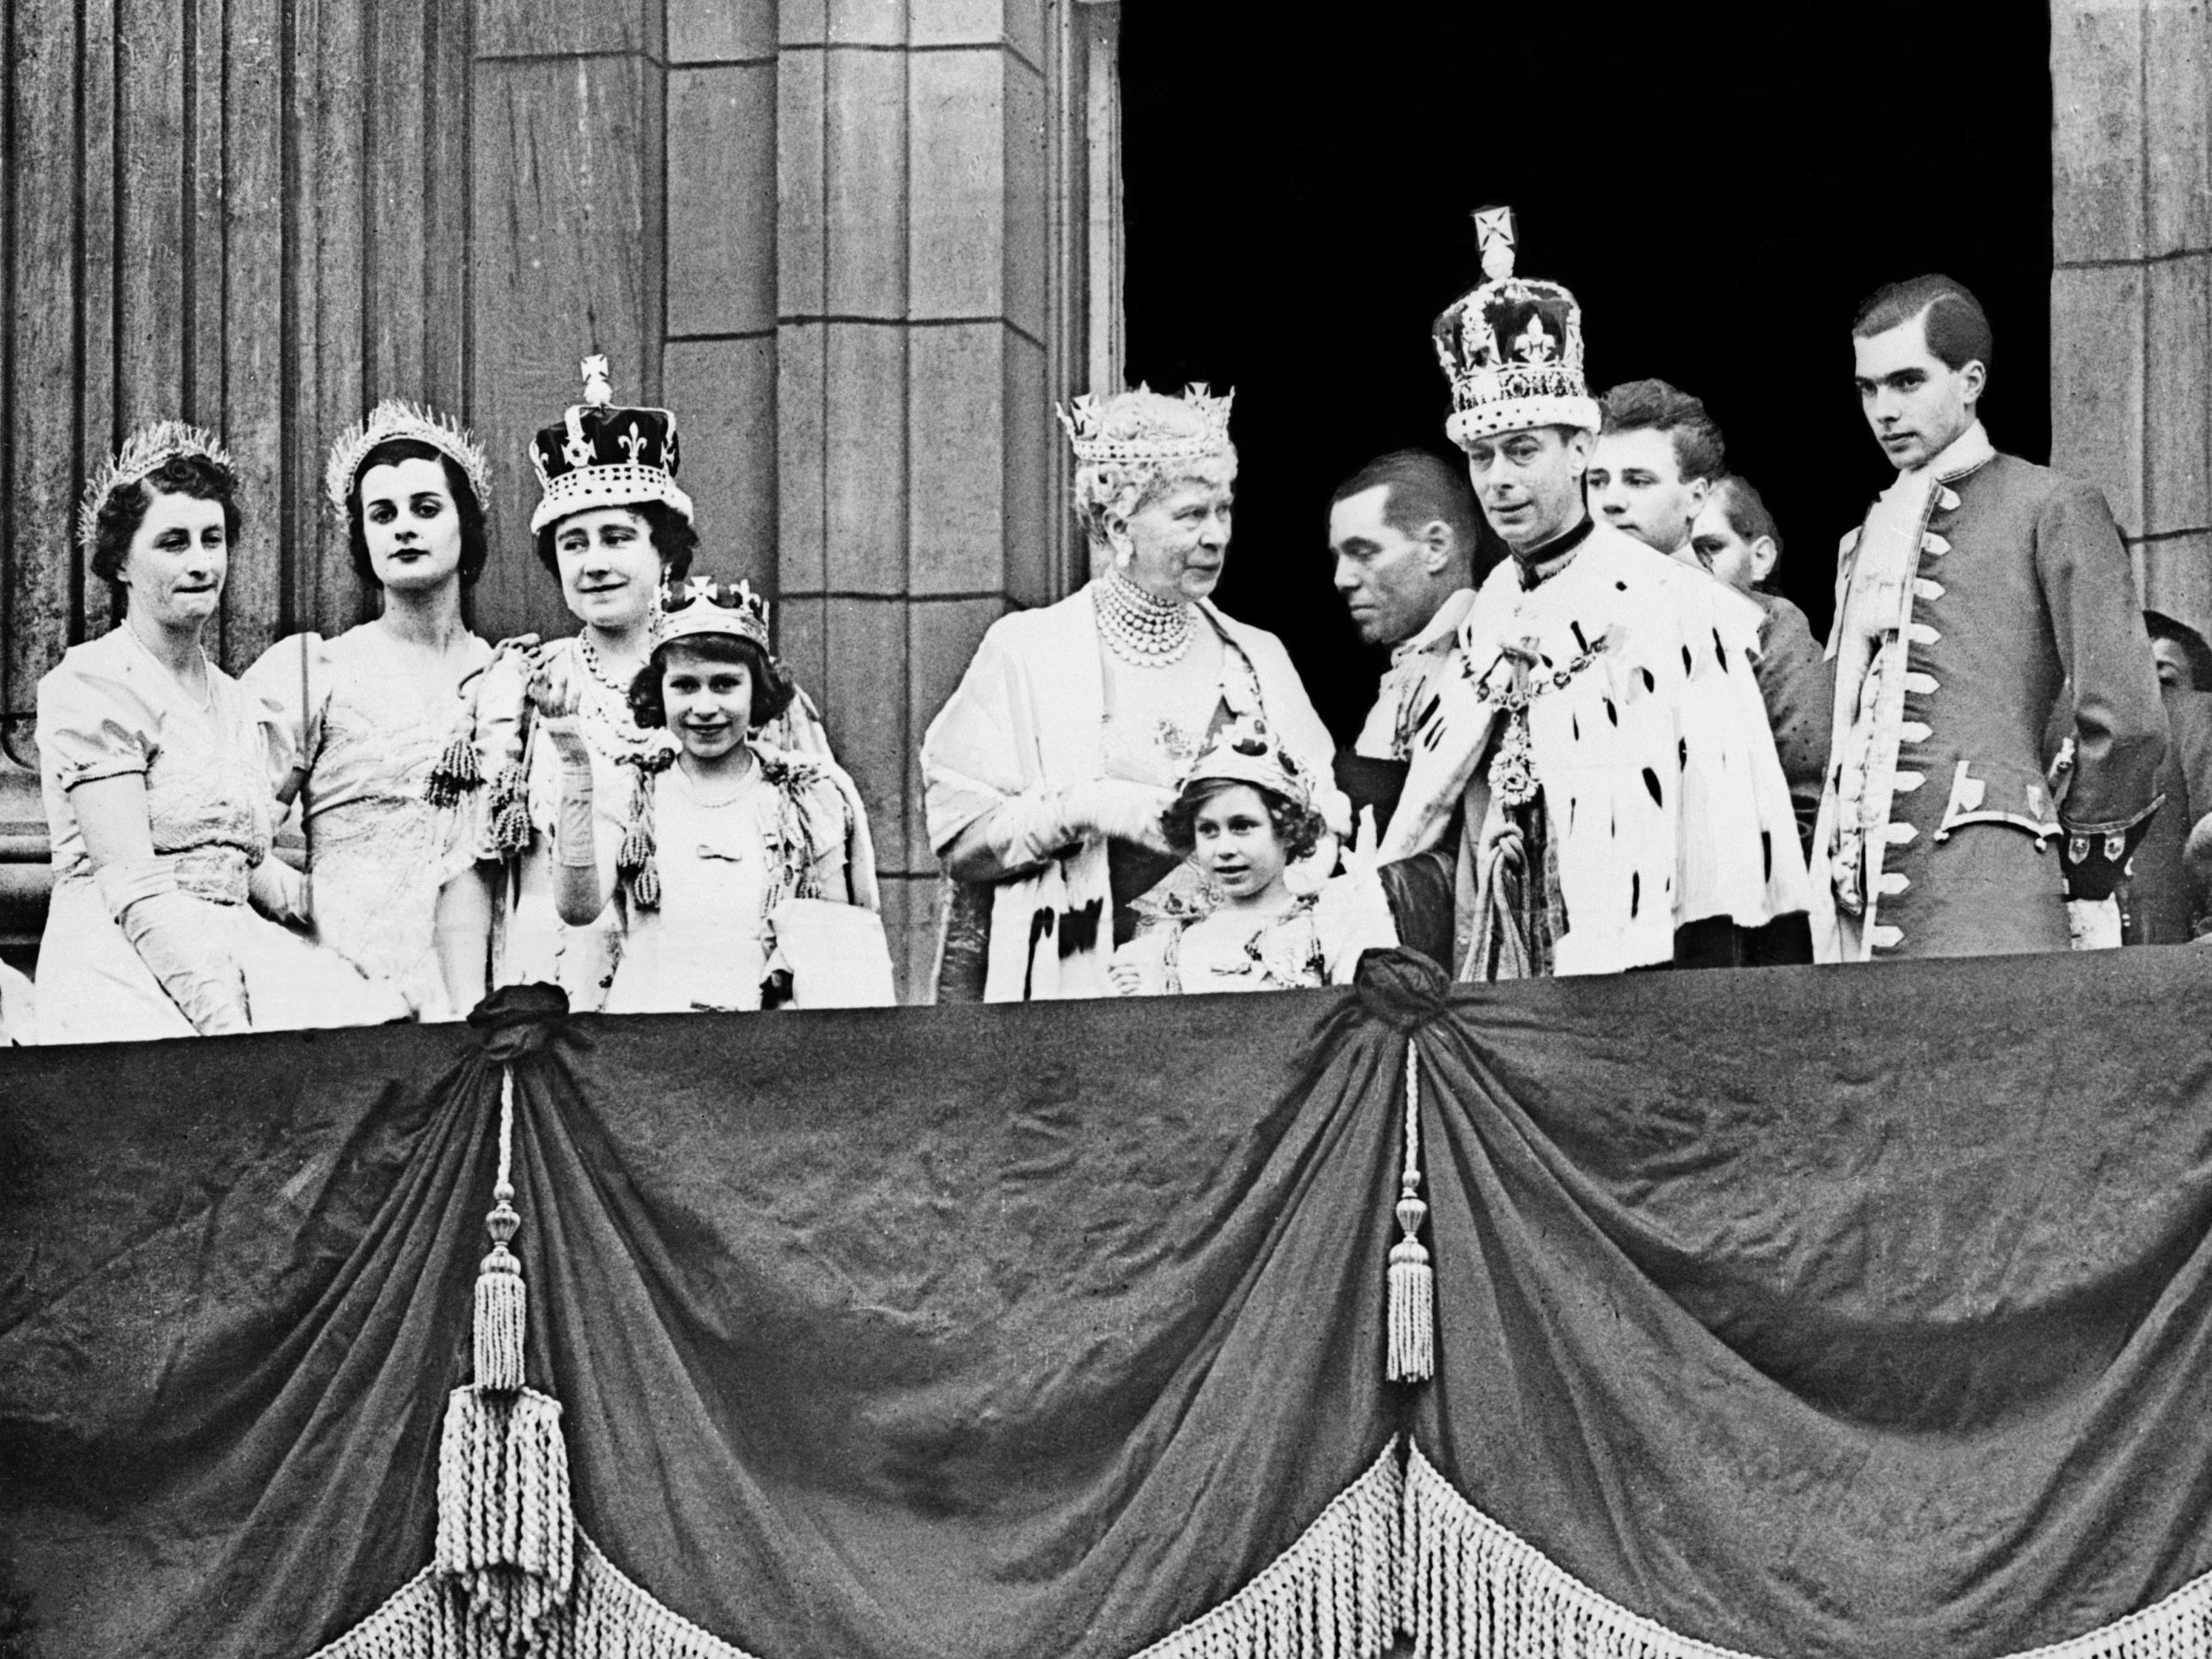 The coronation of King George VI in 1937. Elizabeth, aged 10, became the heir apparent to the throne